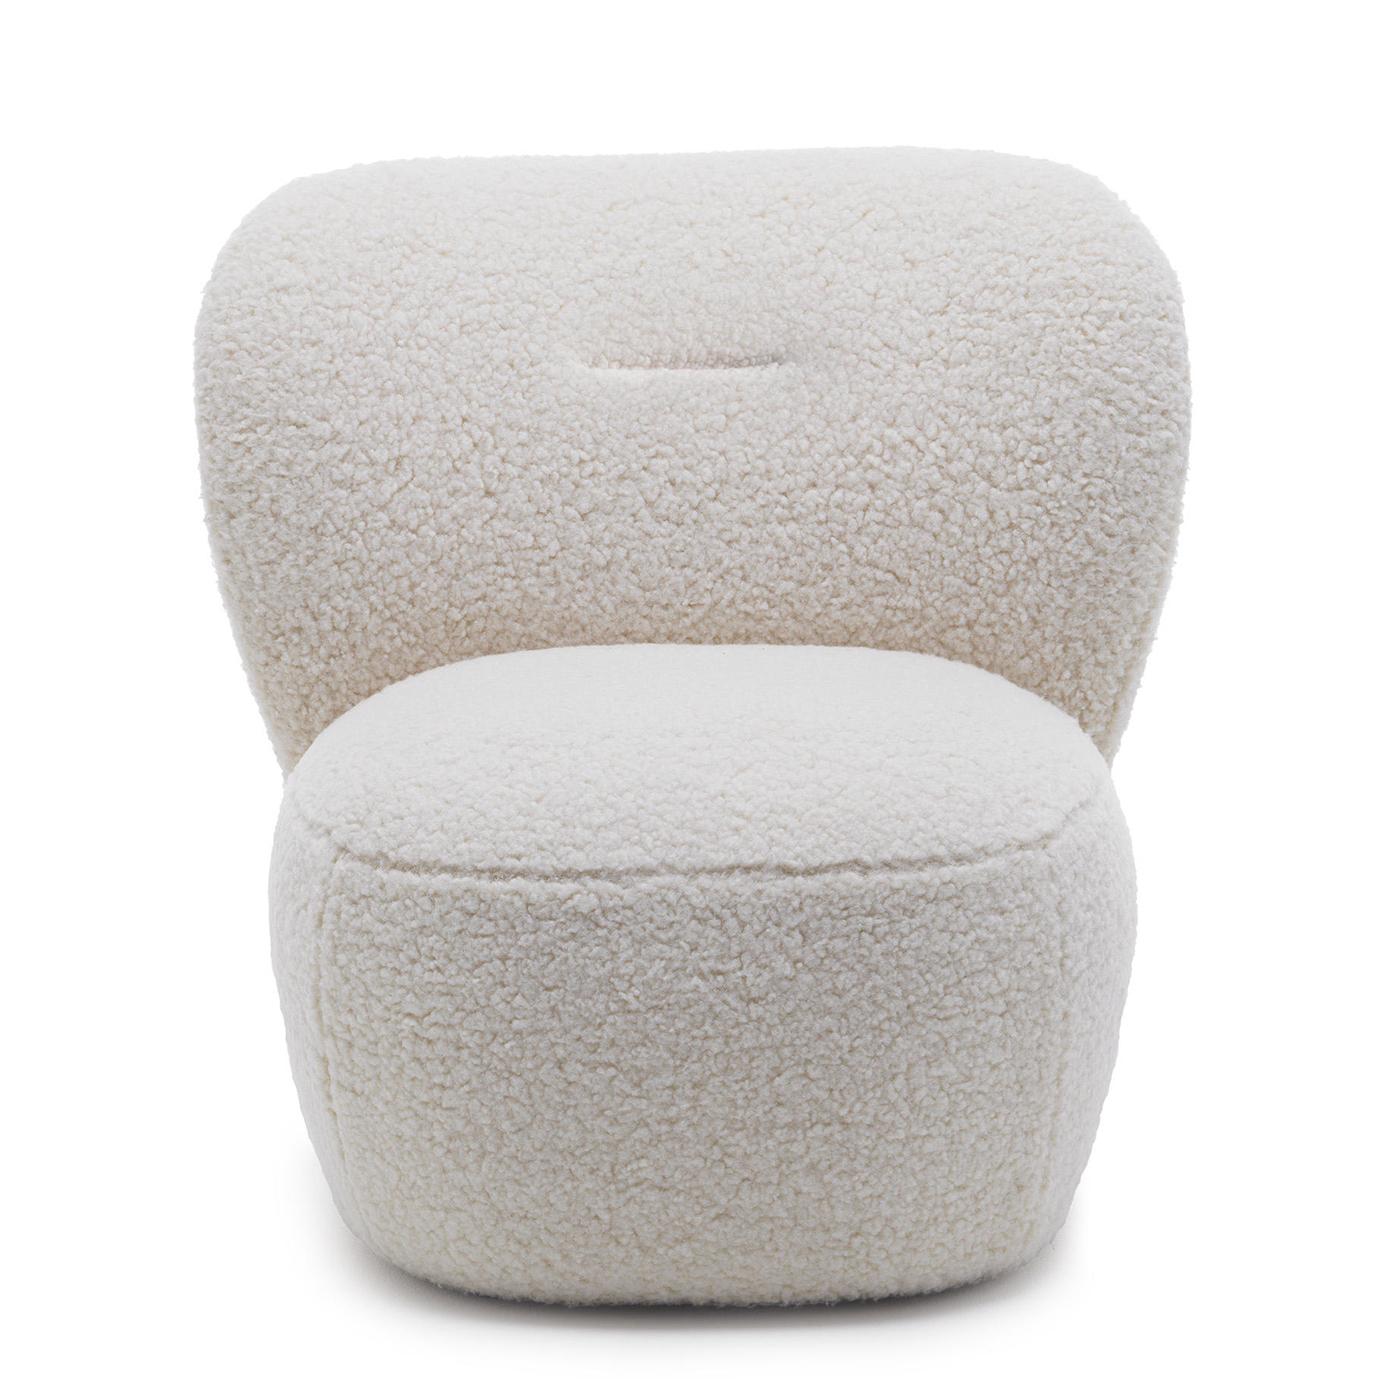 Chair Lamby solid wood structure, upholstered
with foam and covered with removable polar fabric.